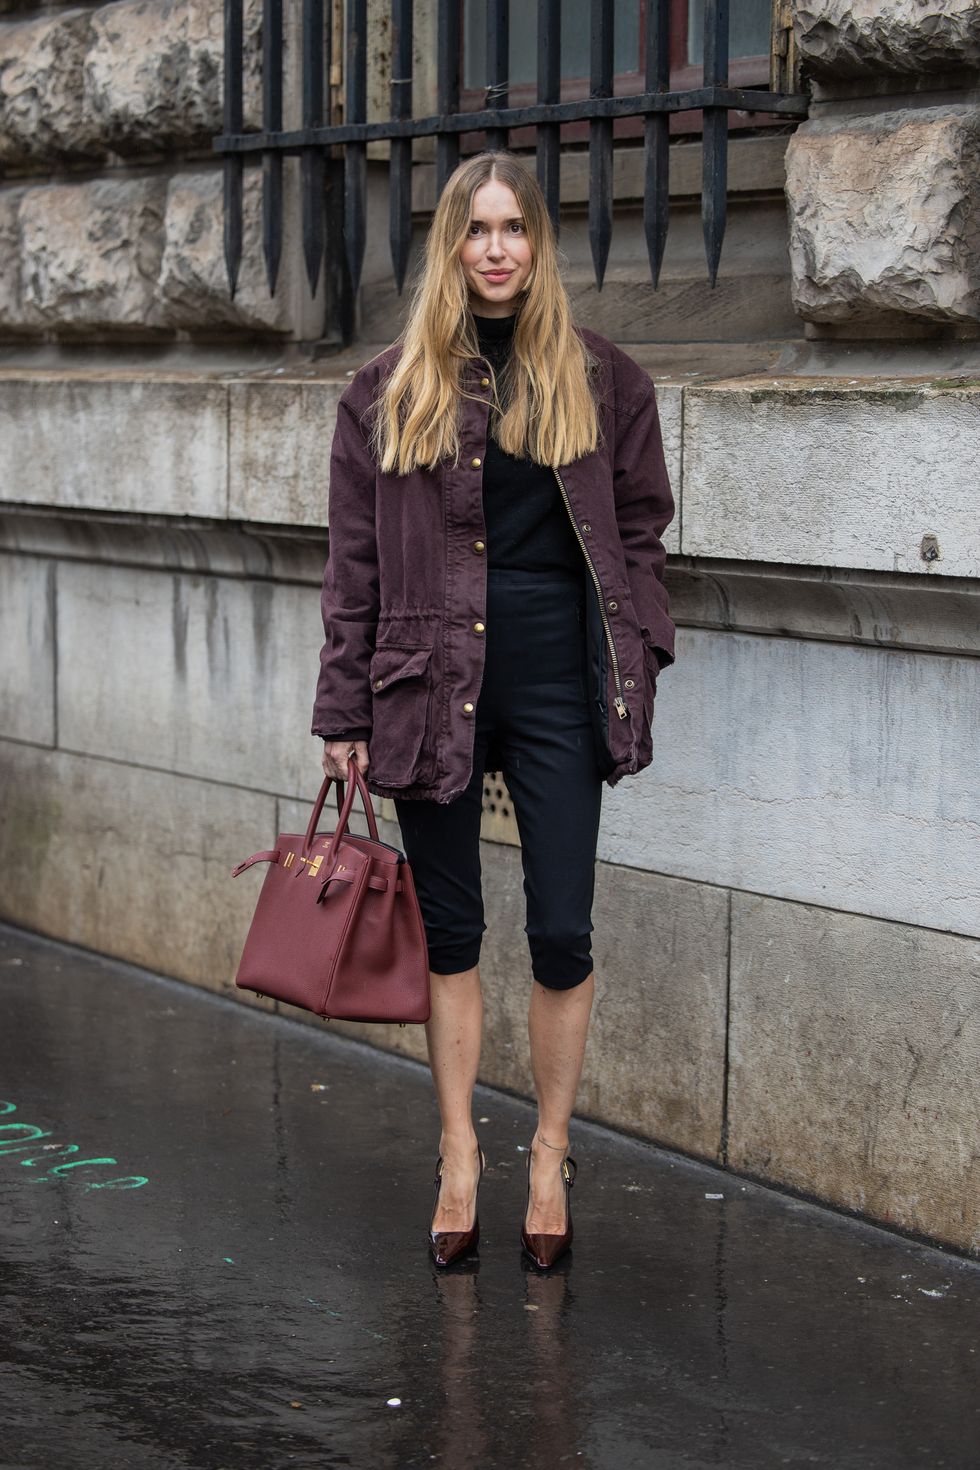 paris, france march 02 pernille teisbaek wears red bag, jacket, black cropped pants, shirt, heels outside hermes during the womenswear fallwinter 20242025 as part of paris fashion week on march 02, 2024 in paris, france photo by christian vieriggetty images